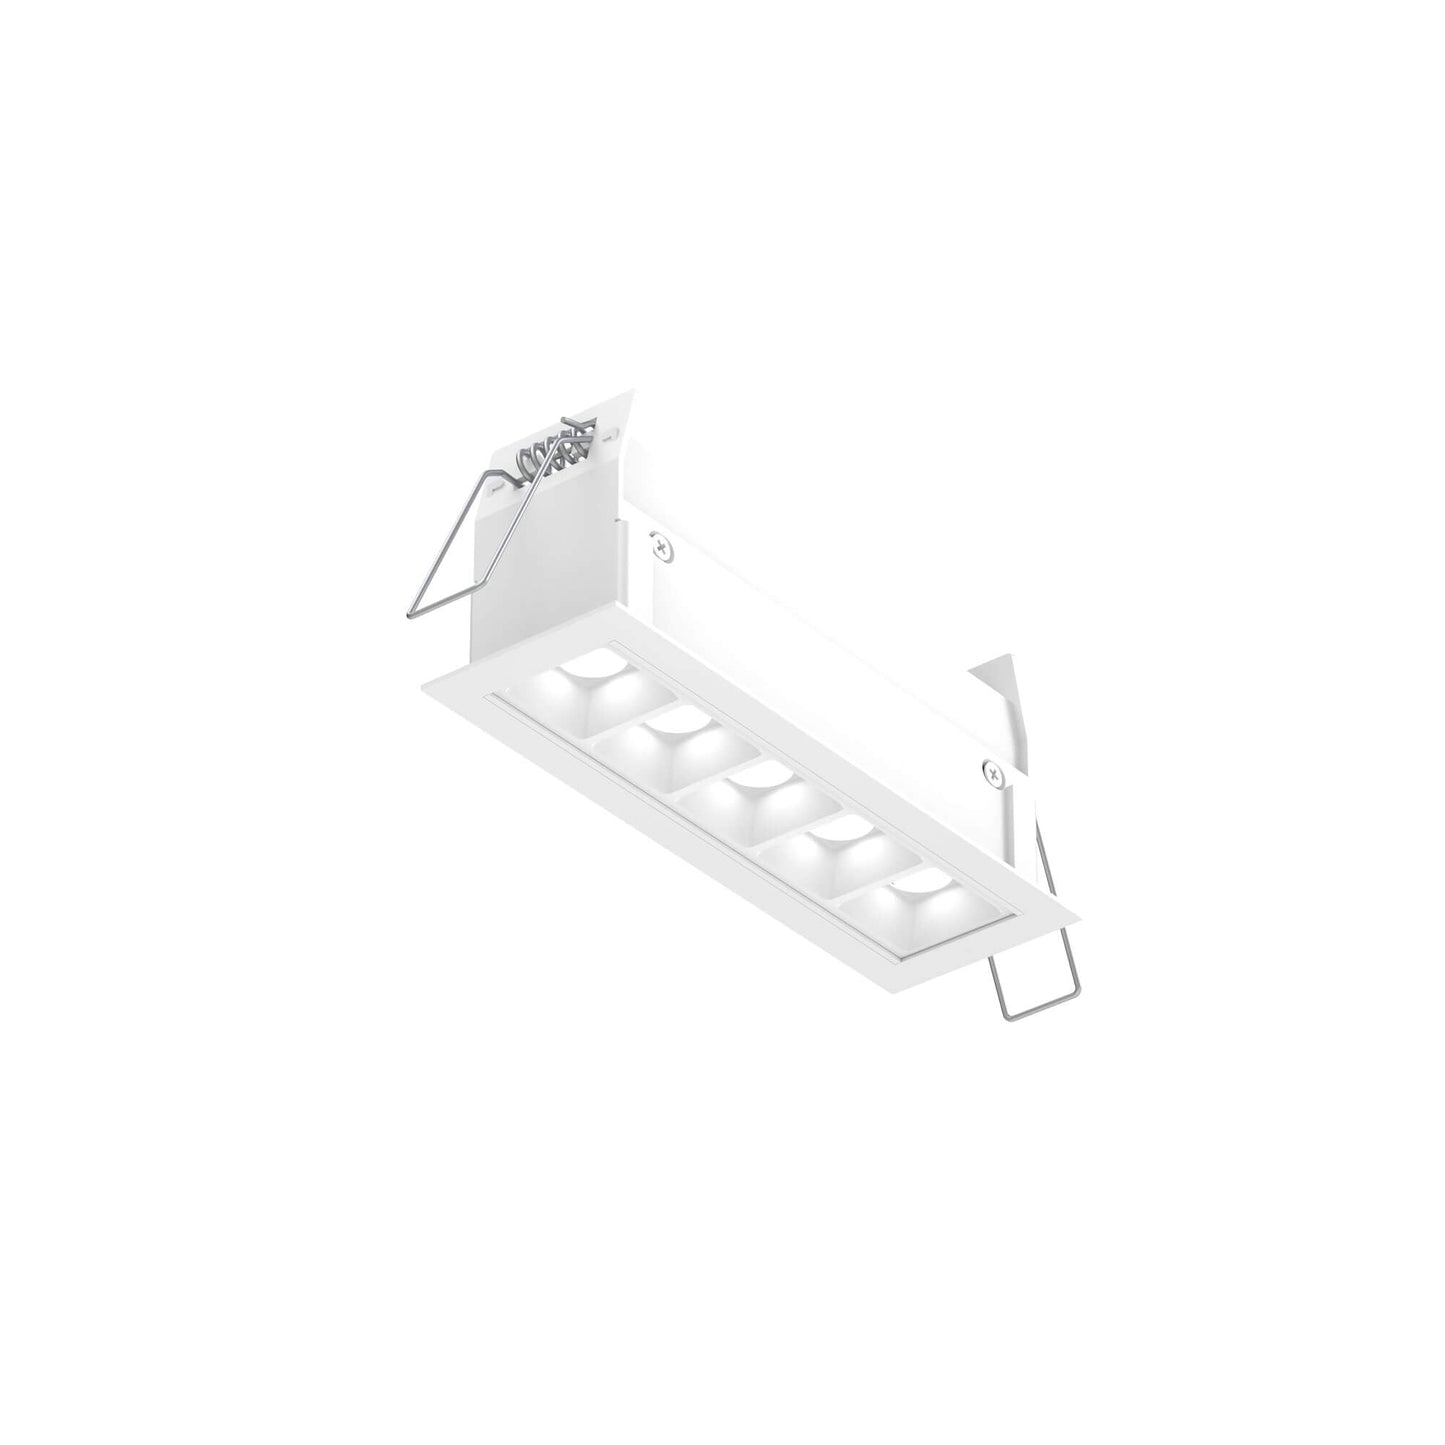 DALS-MSL5-CC-AWHDals Lighting MSL5-CC 6" 14W LED Recessed Multiple Downlight Selectable CCT